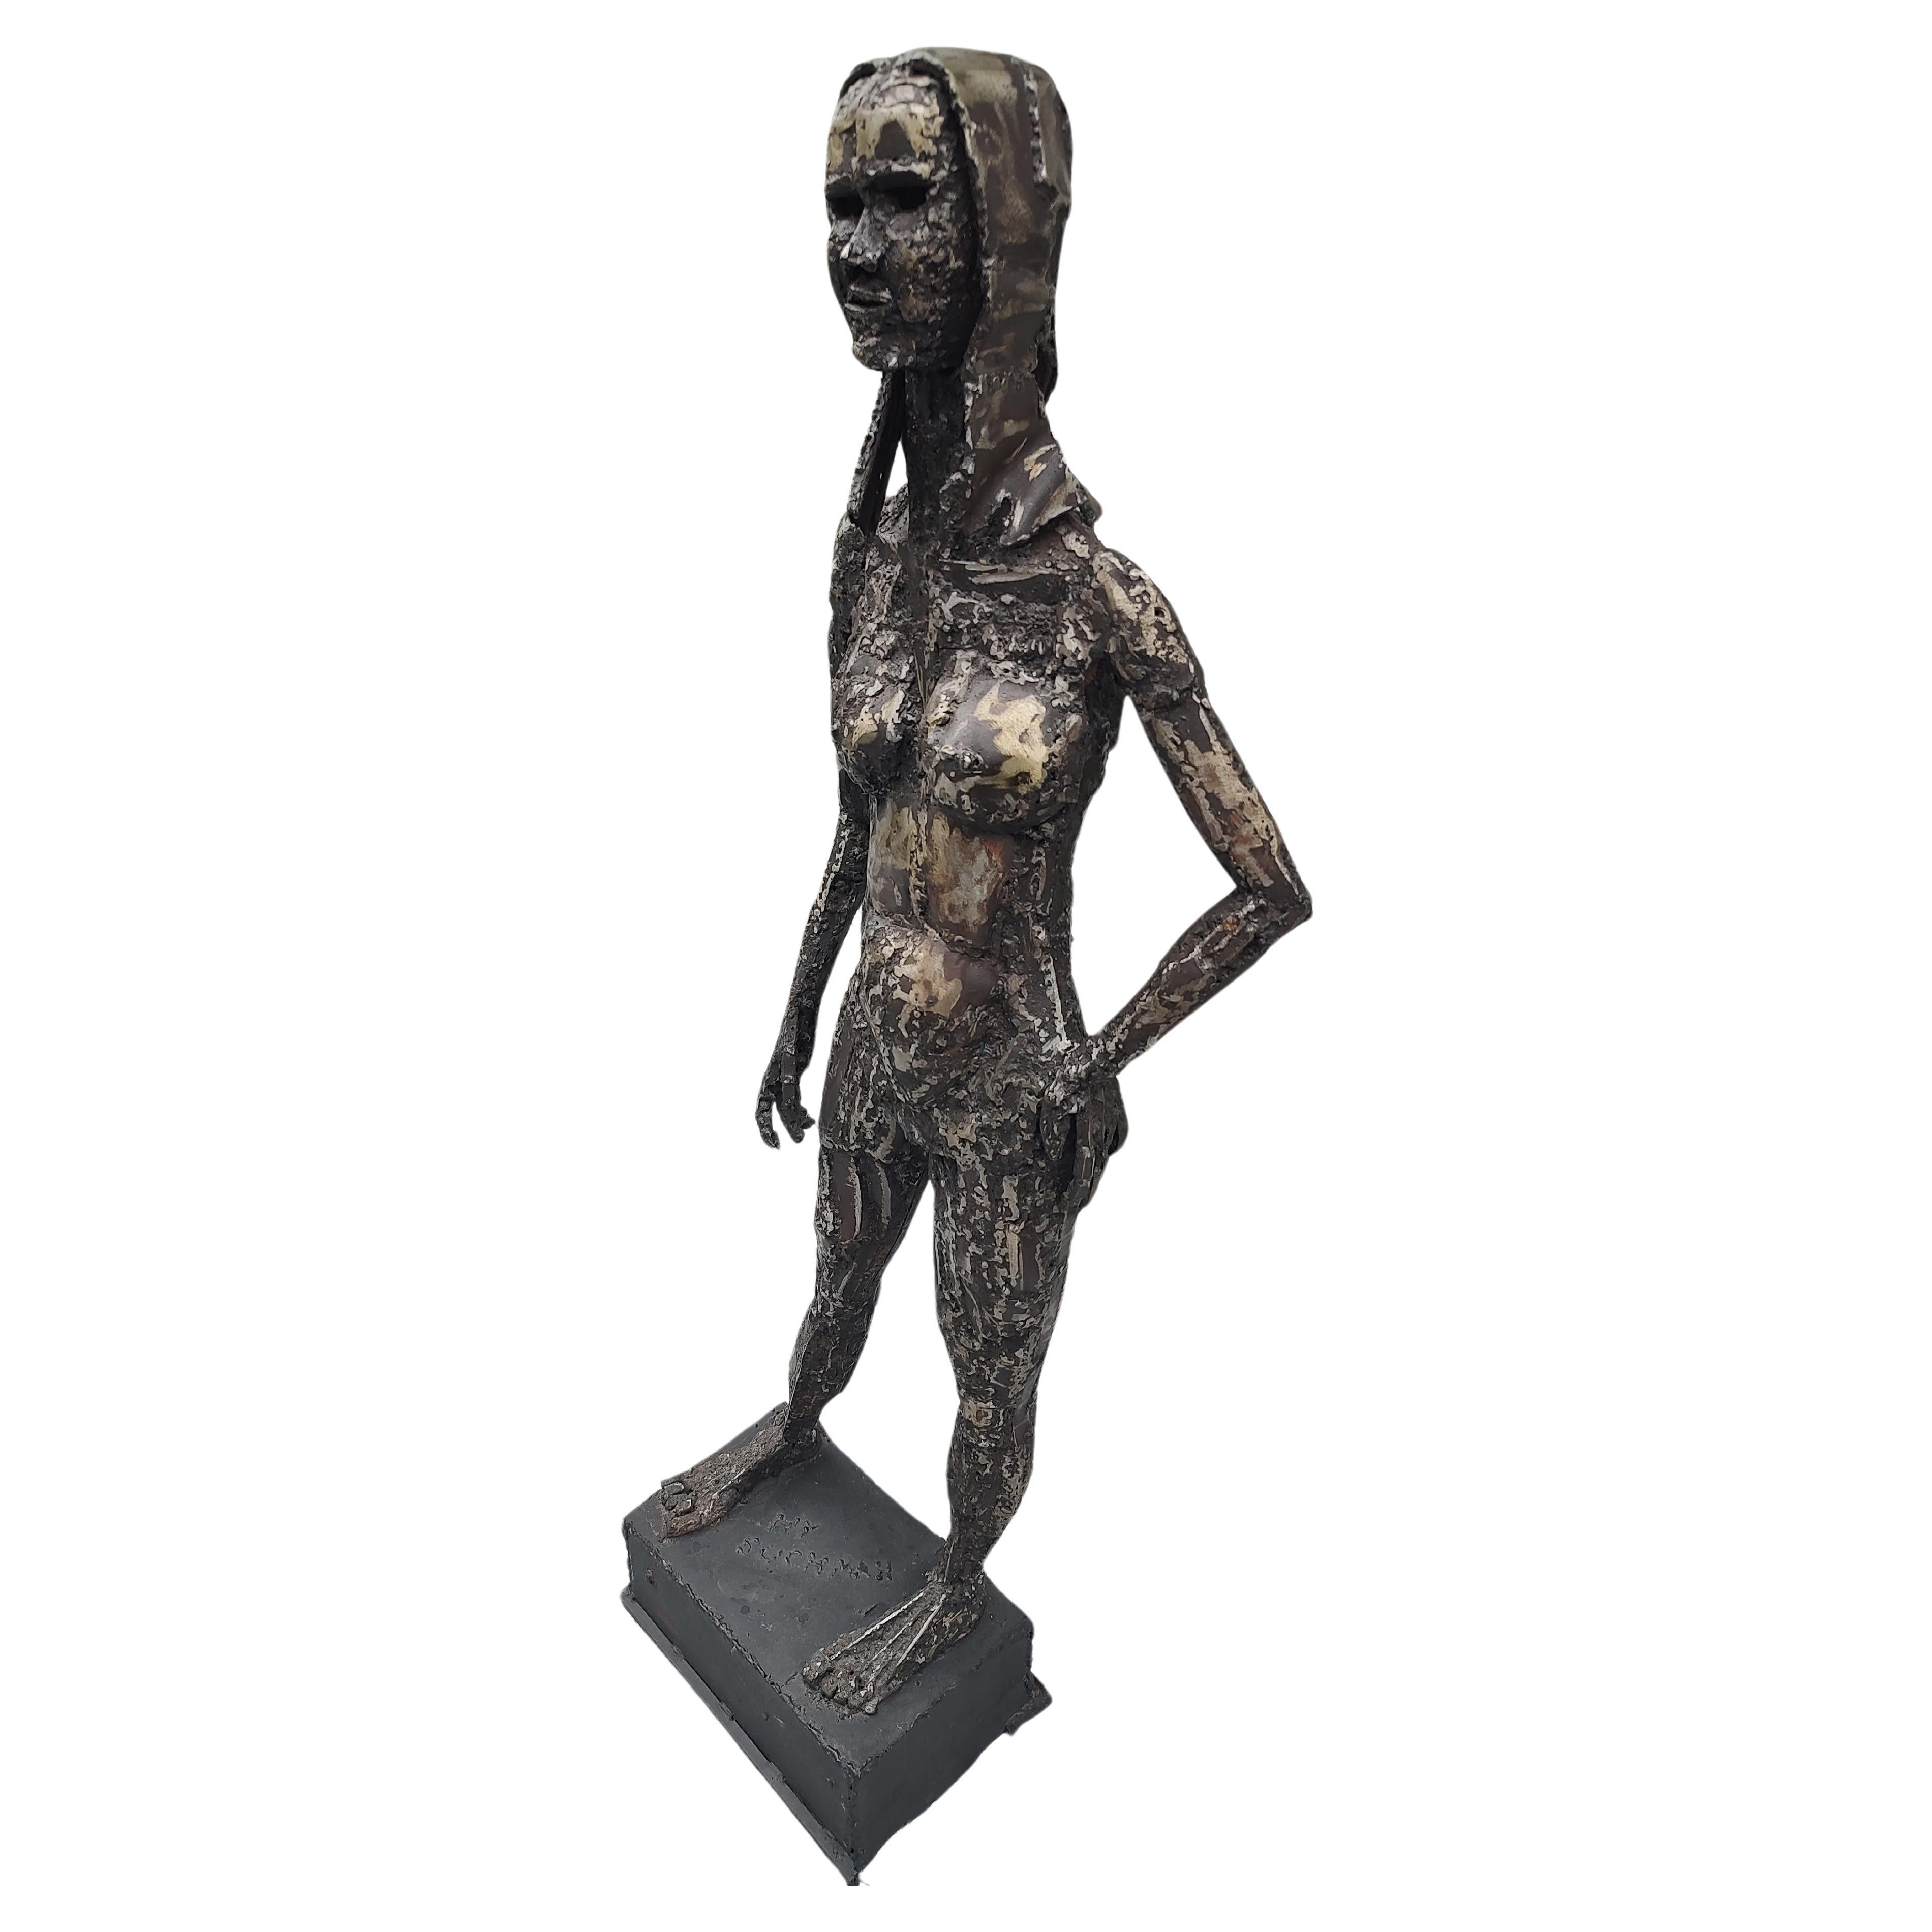 Mid Century Modern Brutalist Mixed Metals Figurative Sculpture of a Woman C1970 In Good Condition For Sale In Port Jervis, NY